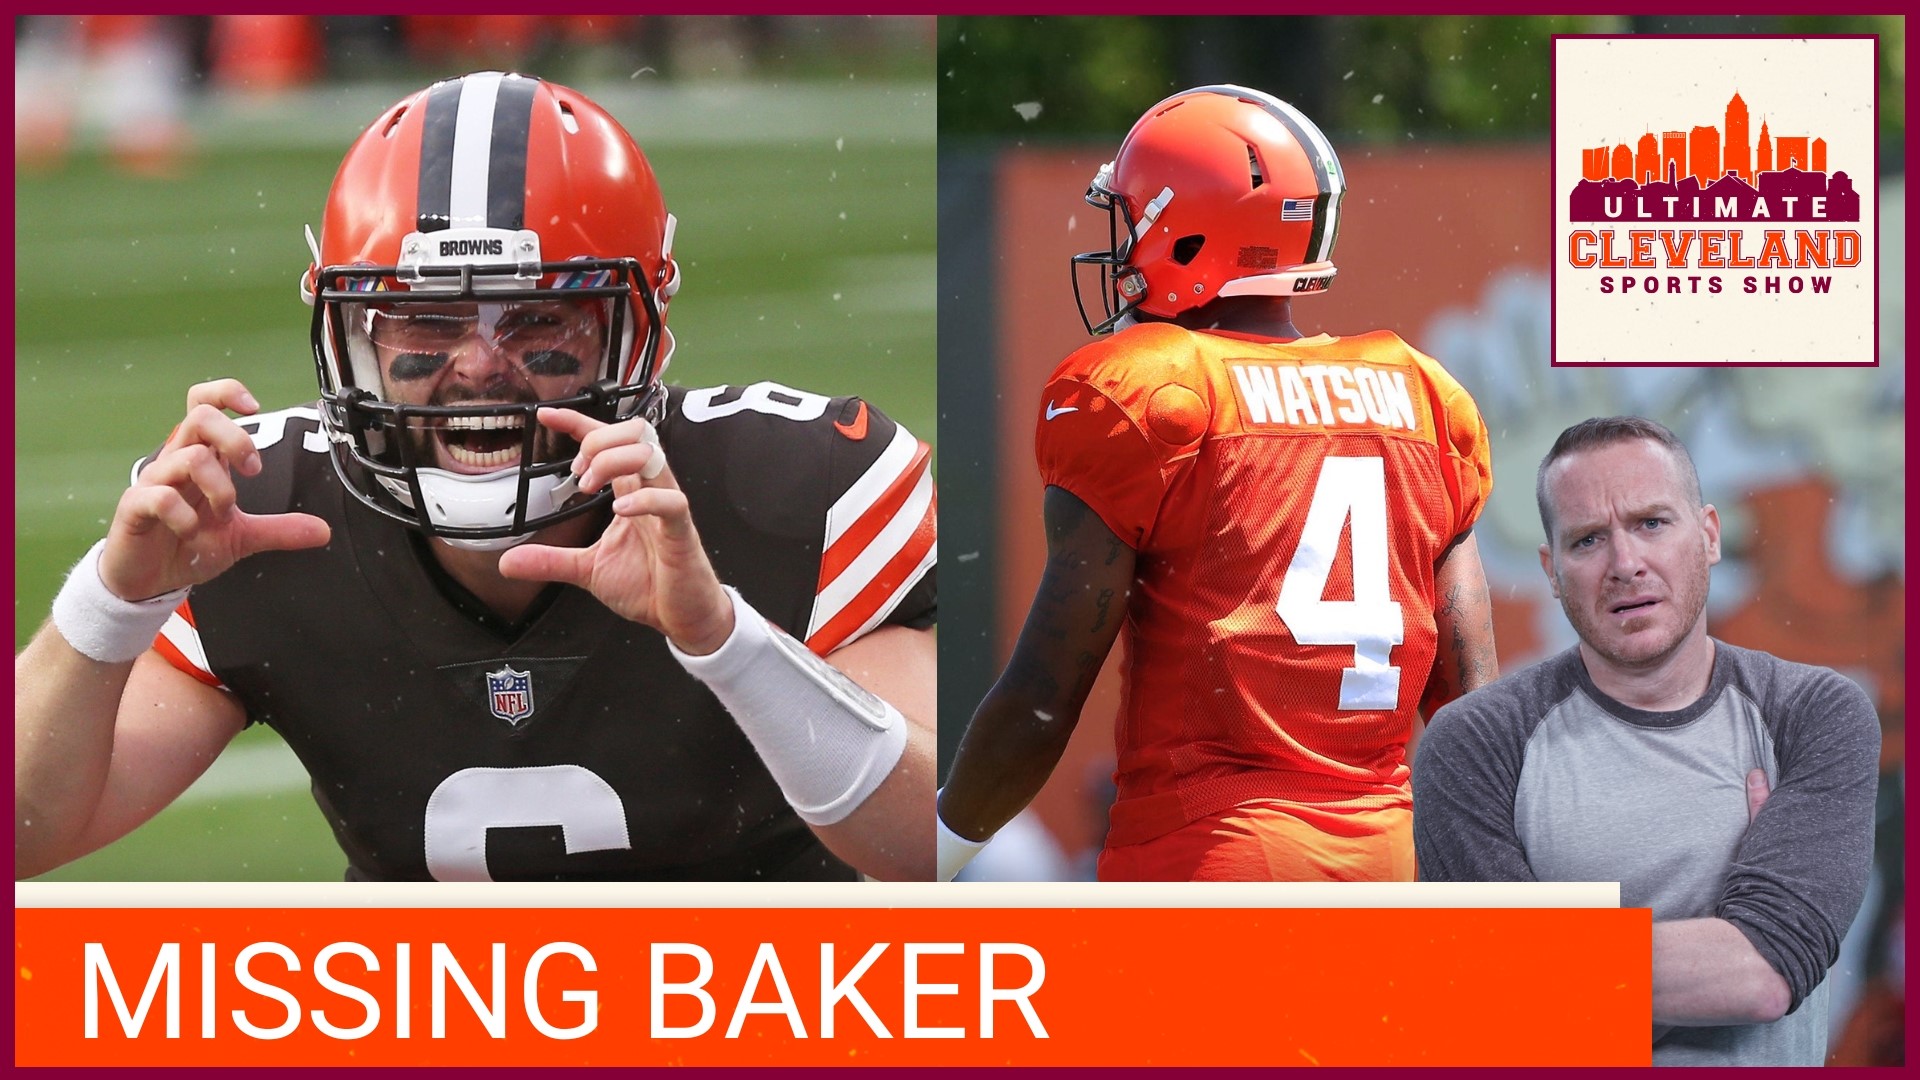 Robert Smith joins the UCSS panel to break down everything Cleveland Browns and Deshaun Watson. Have the regrets of trading Baker Mayfield set in yet?